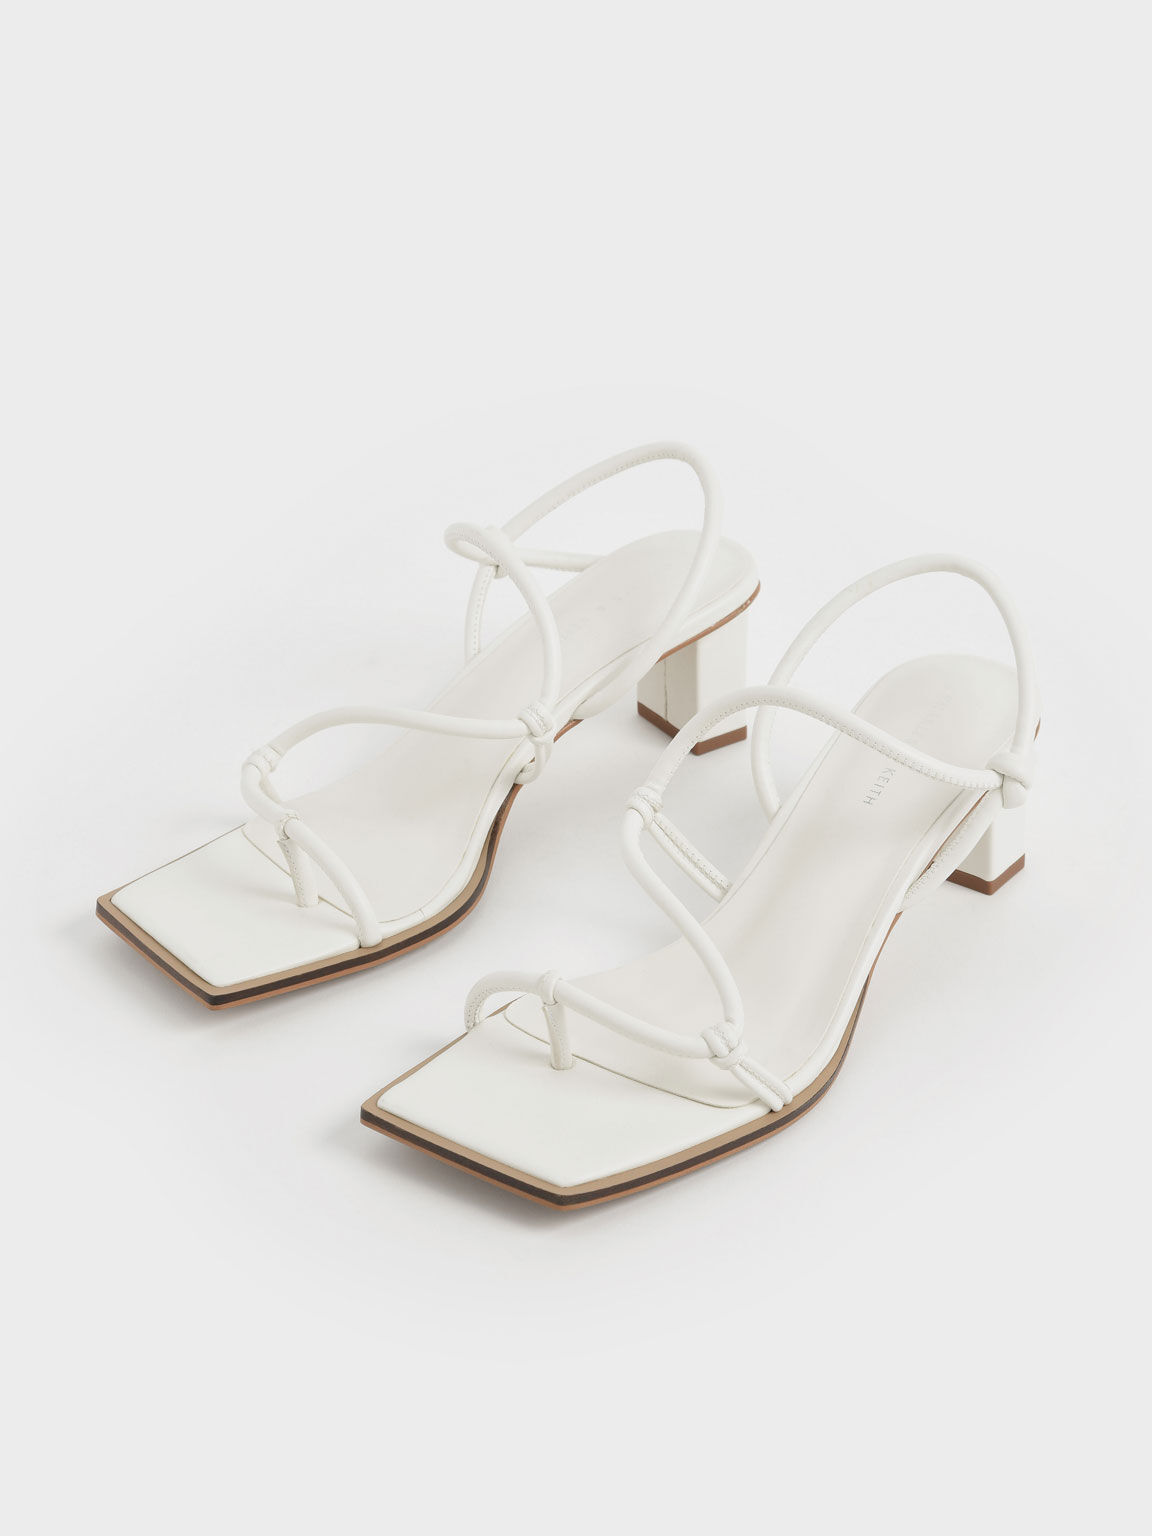 Strappy Toe-Loop Heeled Sandals, White, hi-res